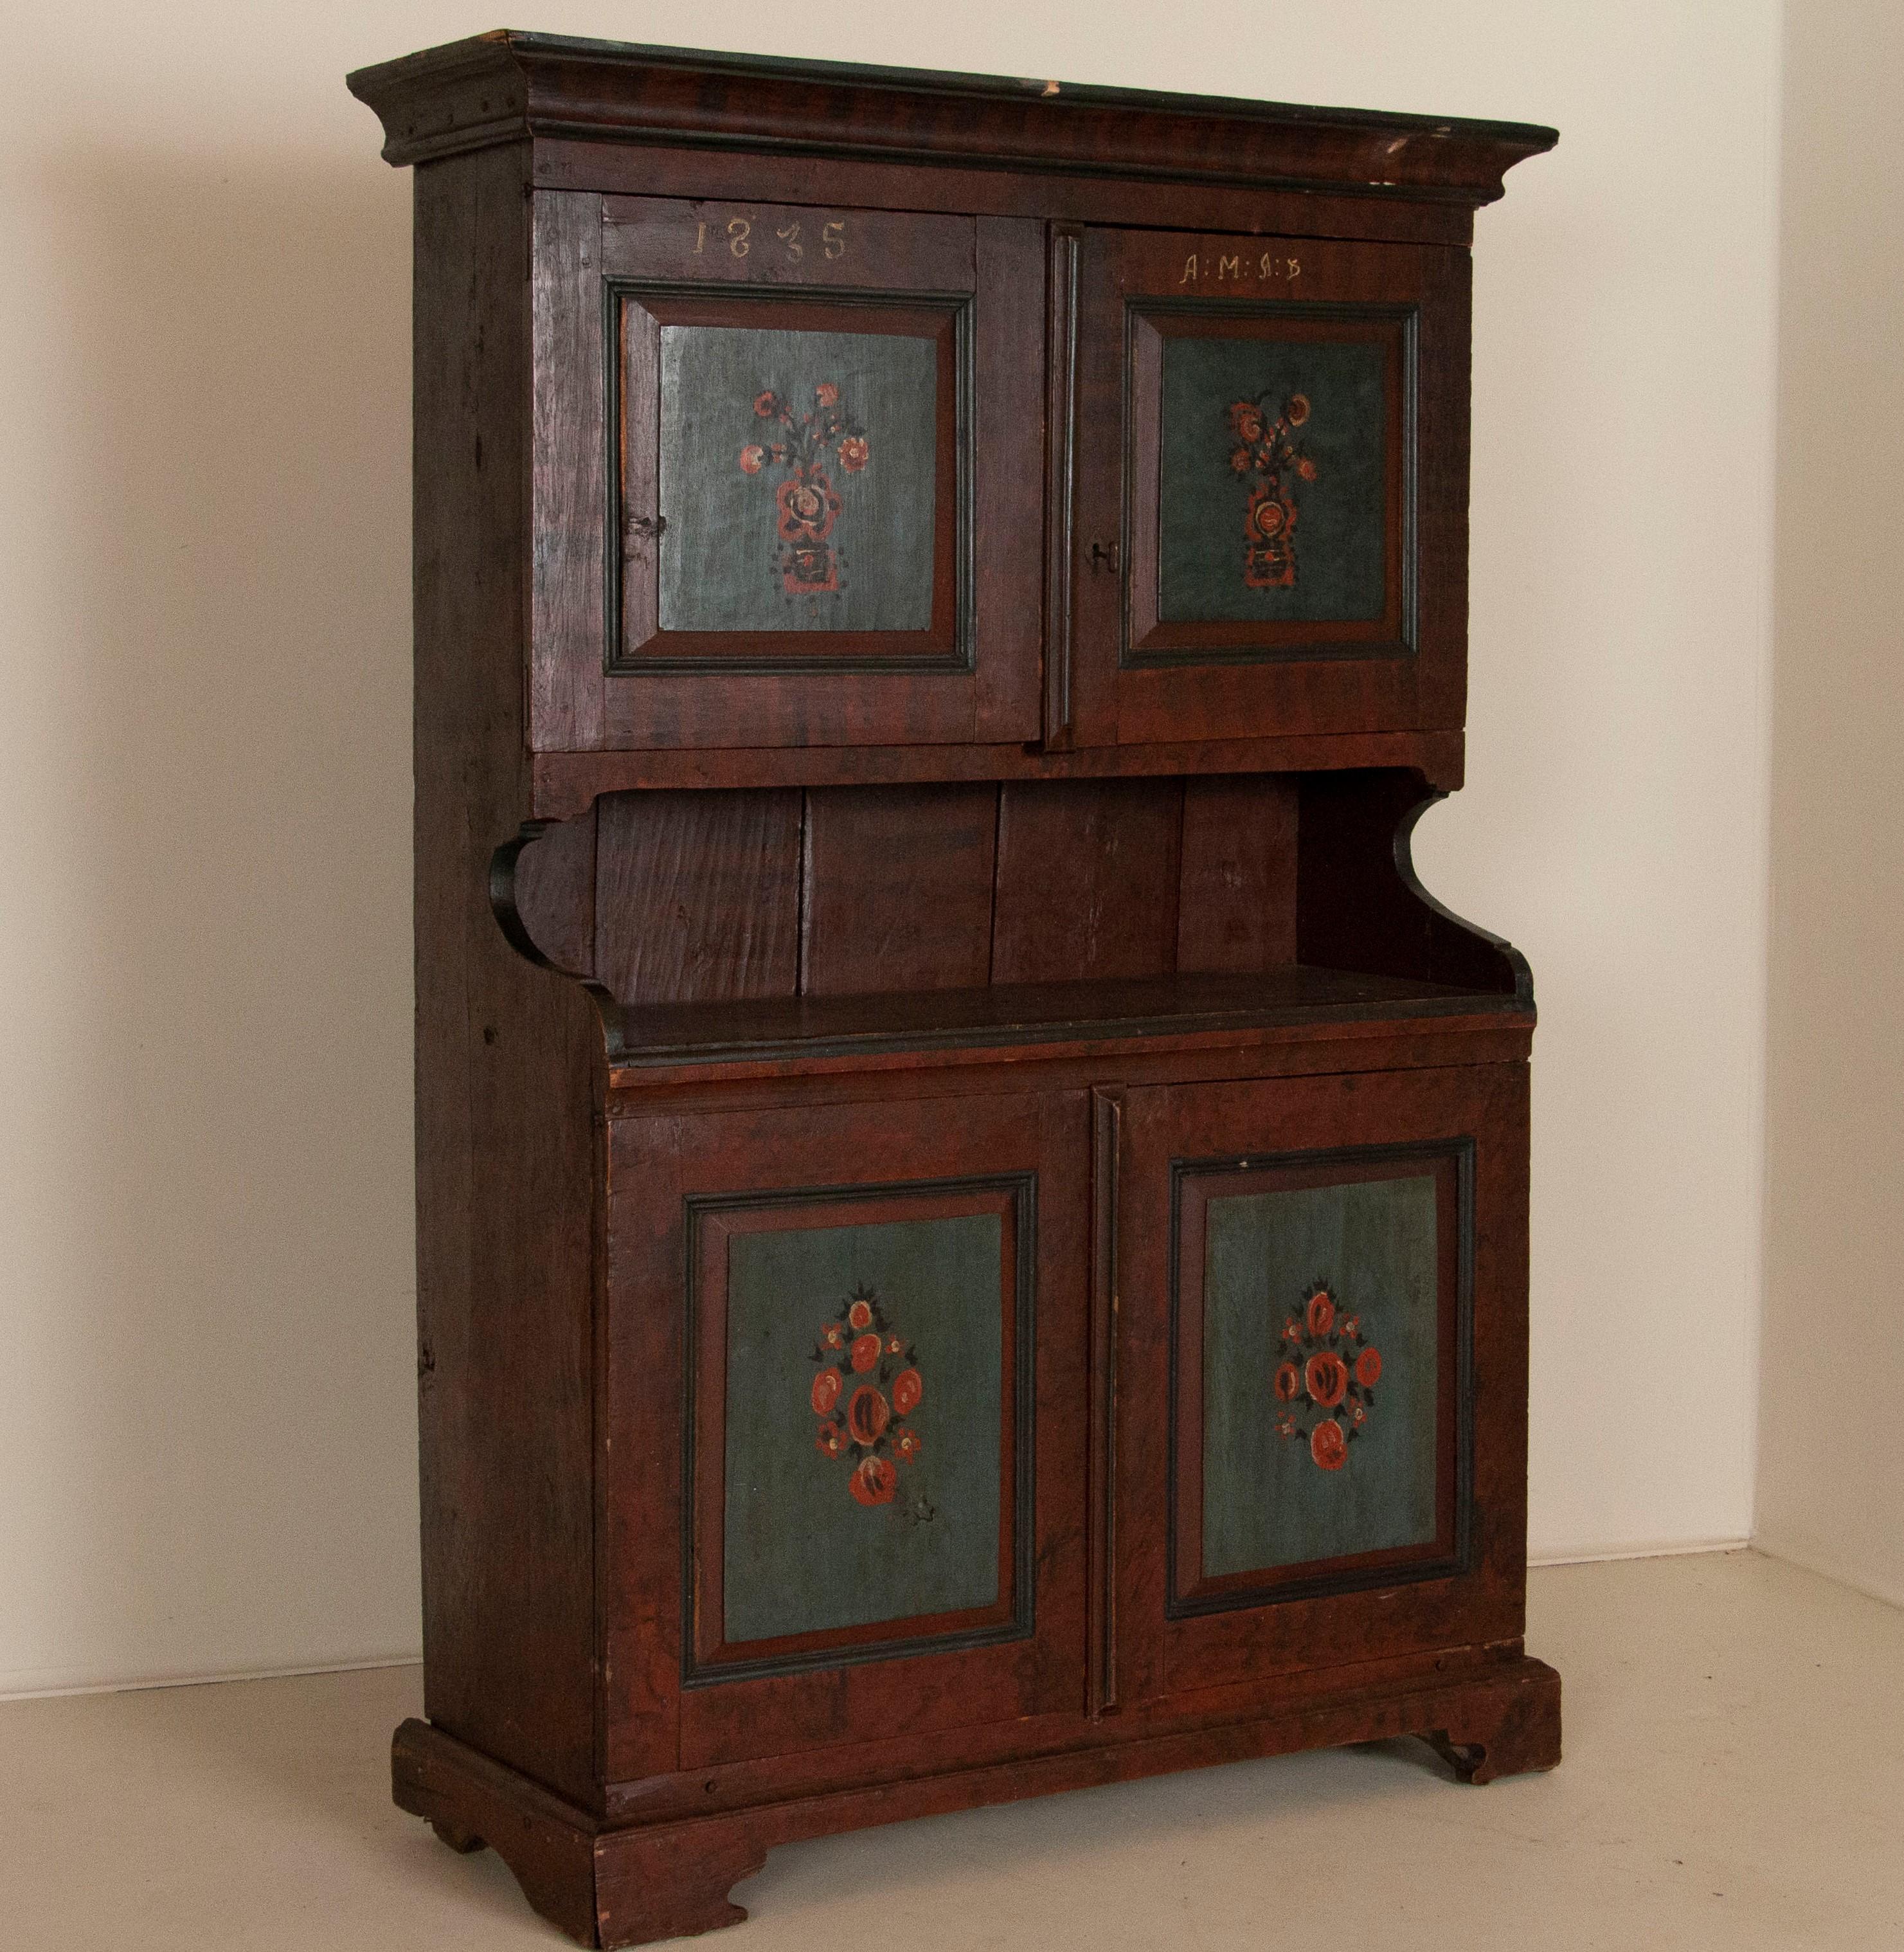 The paint and finish on this wonderful cupboard dated 1835 is all original, revealing its Swedish country roots. Everything about this painted cabinet hold to the traditional styles found in Sweden in the 1800s. The 4 paneled doors all have a teal